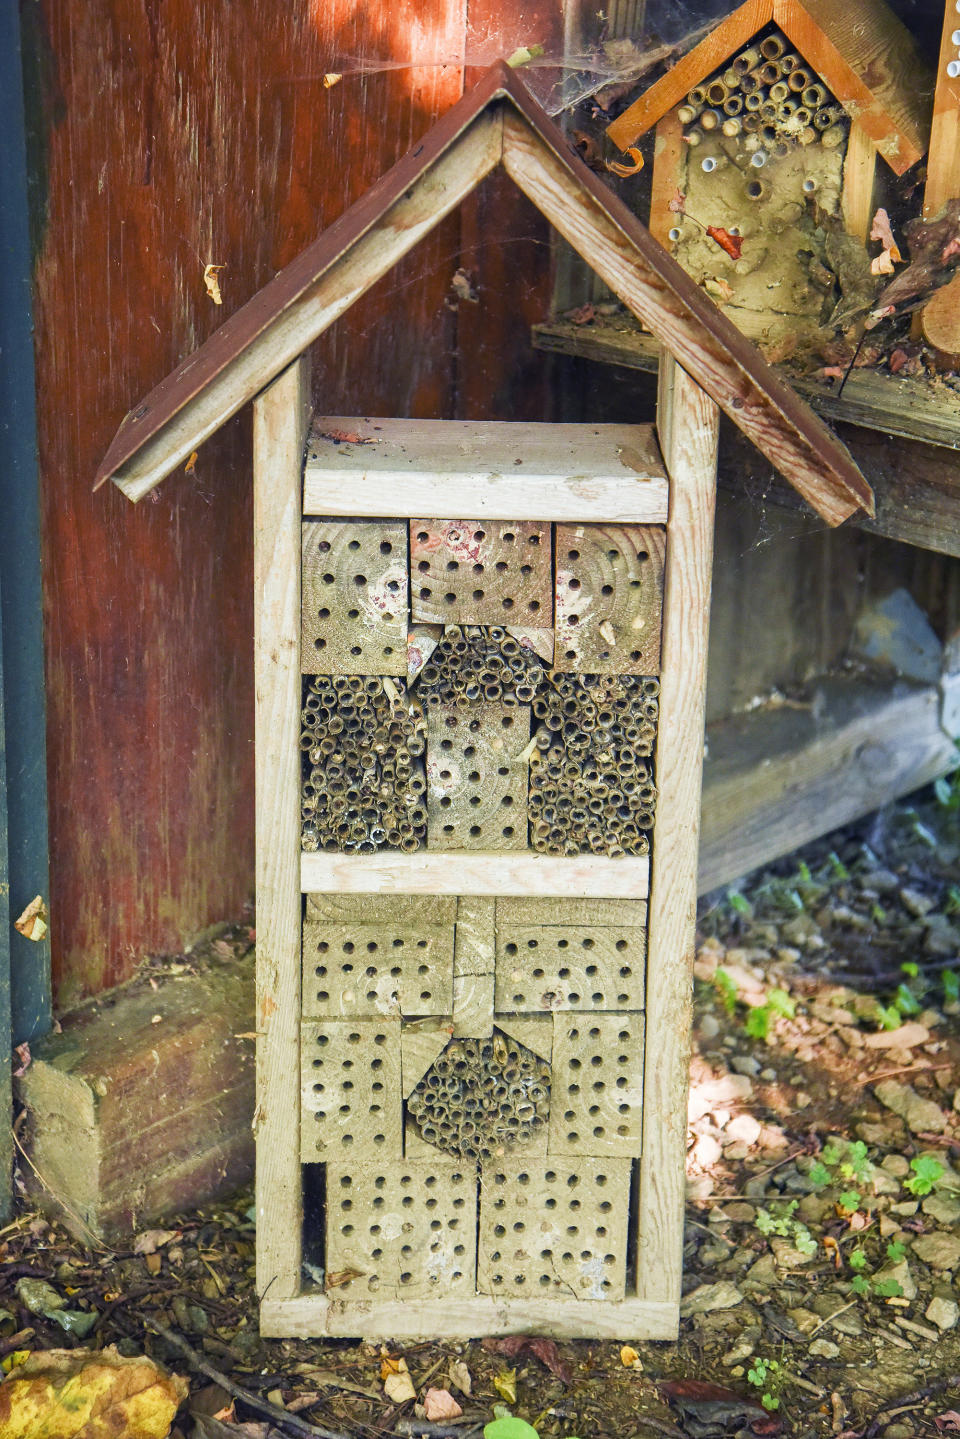 This image released by Timber Press shows a large bee hotel, or nesting block, from the book "Nature's Best Hope: How You Can Save the World in Your Own Yard" by Douglas W. Tallamy, adapted for a young audience by Sarah L. Thomson, from Tallamy's original release, "Nature's Best Hope: A New Approach to Conservation That Starts in Your Yard." (Douglas W. Tallamy/Timber Press via AP)